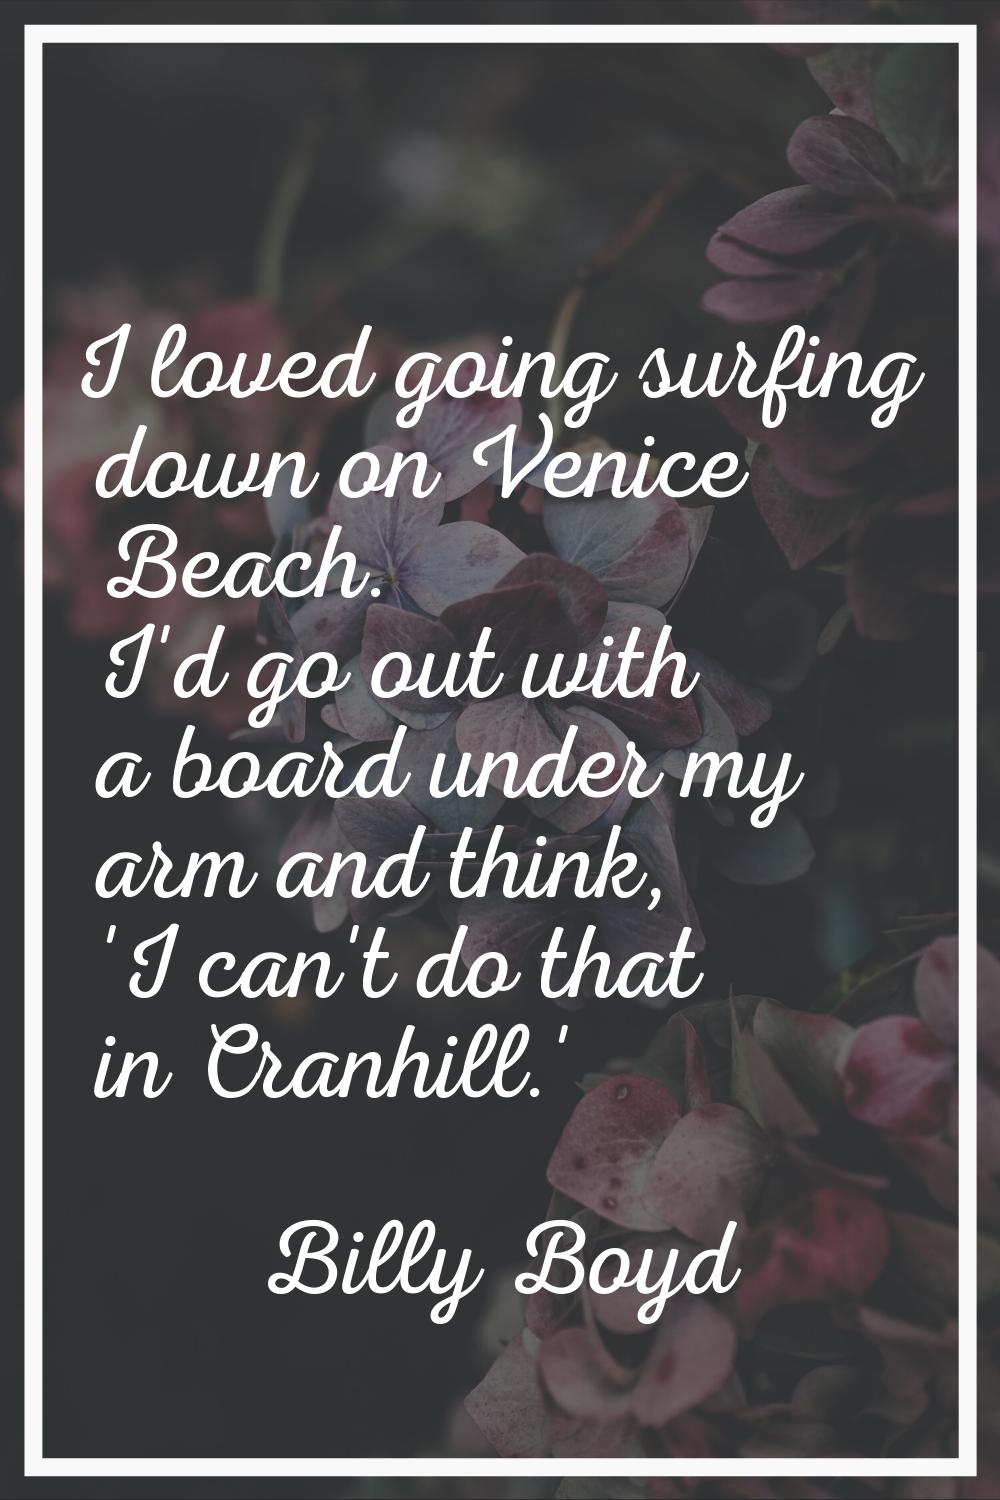 I loved going surfing down on Venice Beach. I'd go out with a board under my arm and think, 'I can'